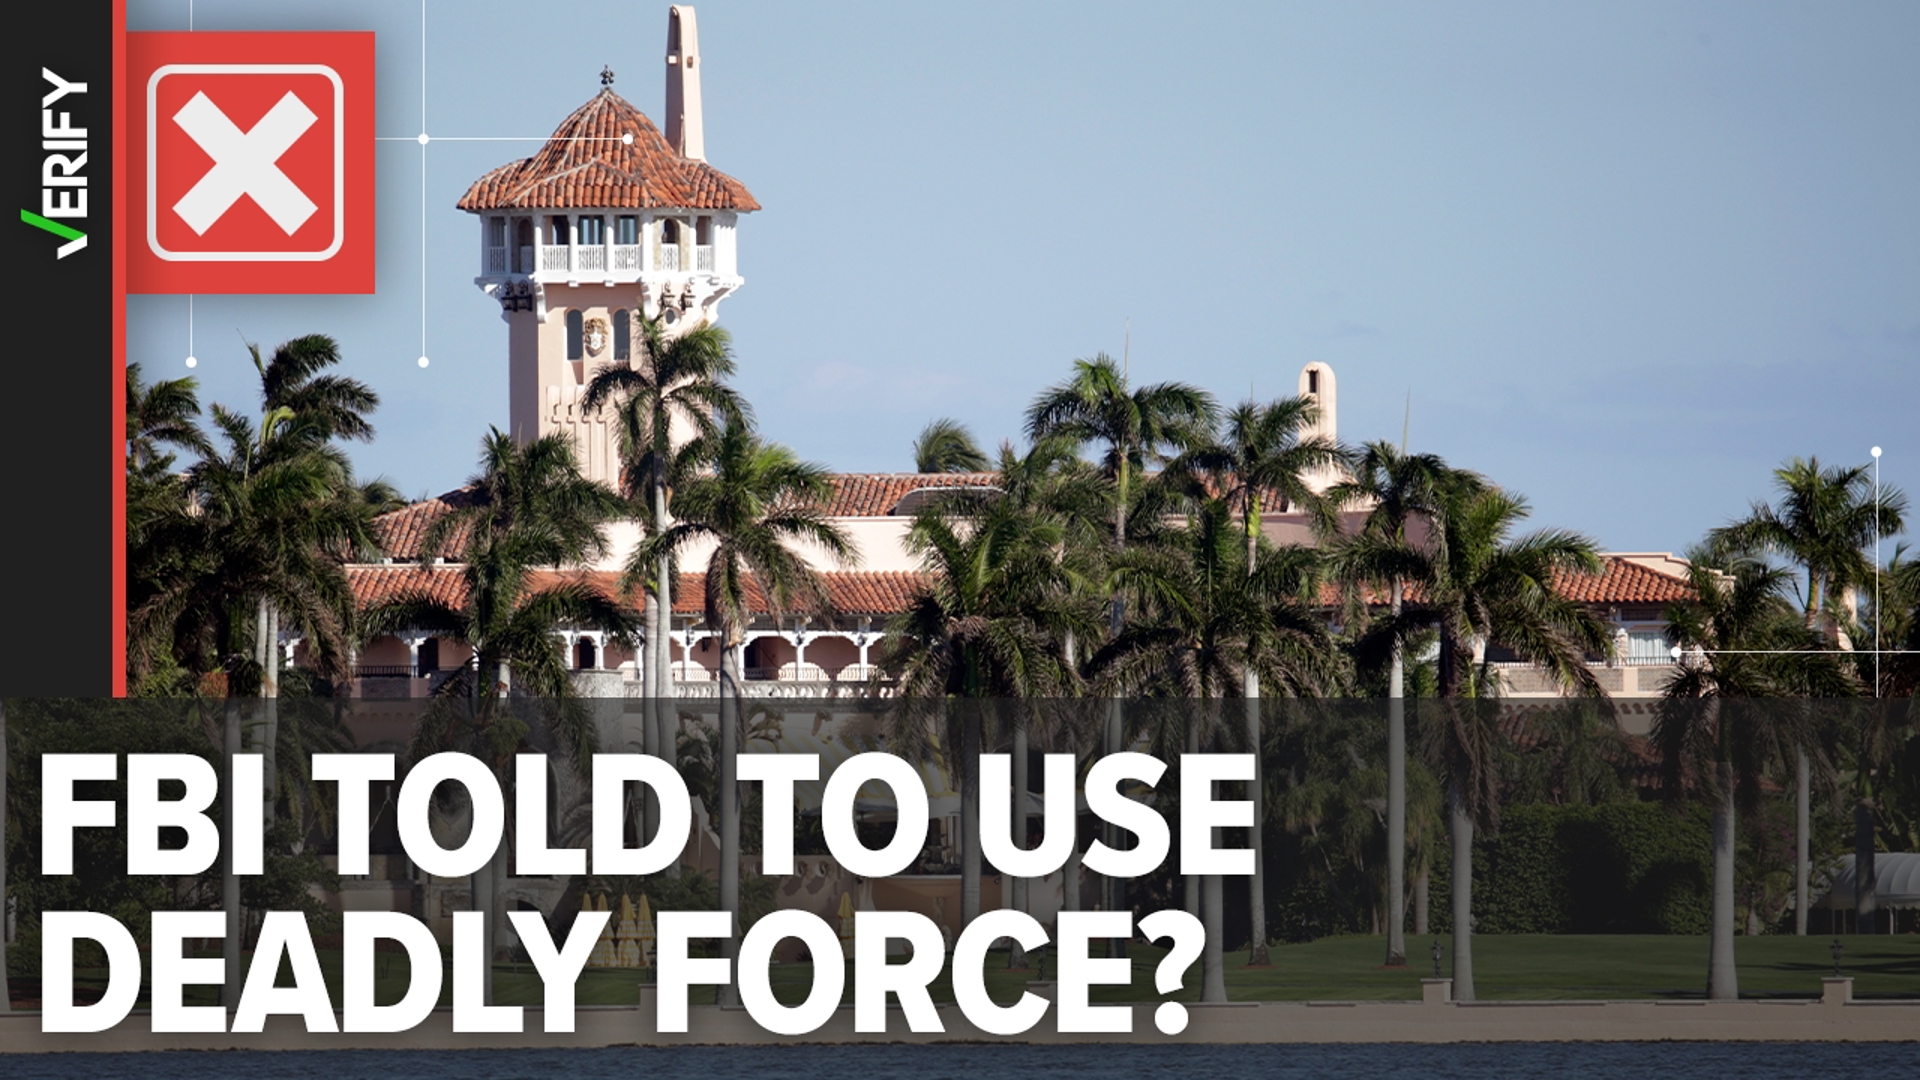 False claims assert boilerplate language limiting the use of deadly force by FBI agents was an authorization for a ‘hit’ during the search of Mar-a-lago in 2022.